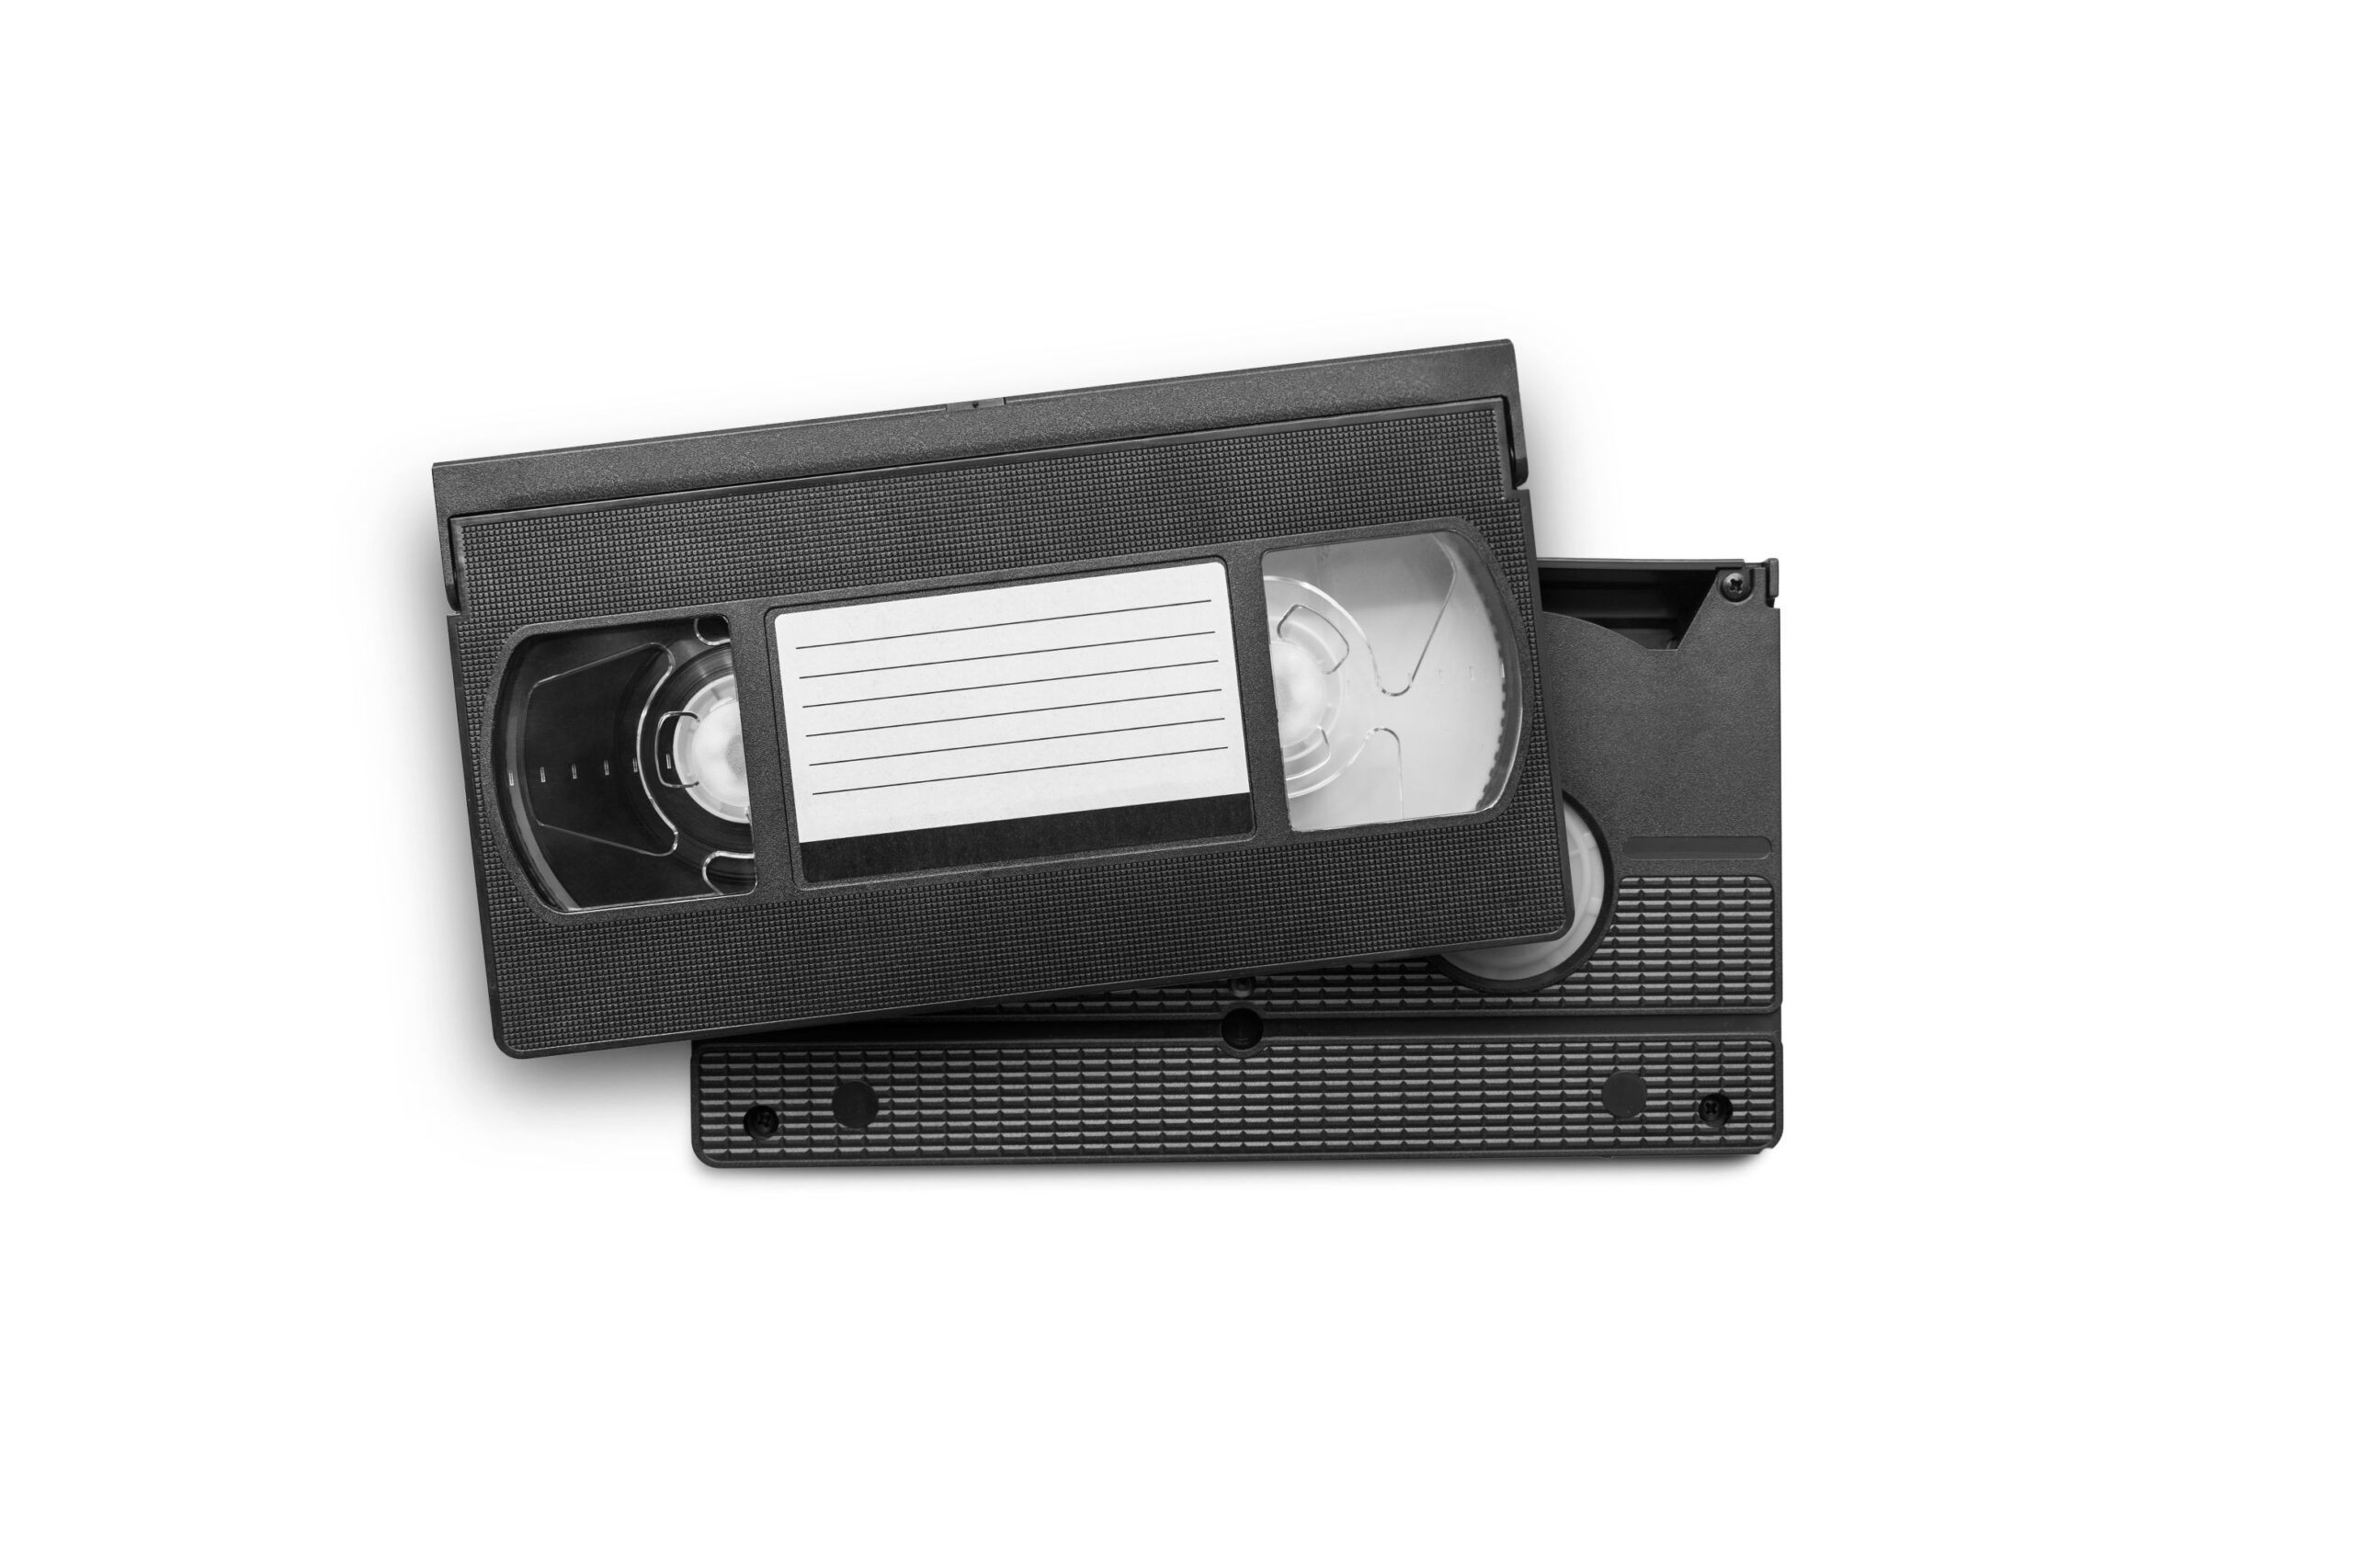 large-picture-of-an-old-video-cassette-tape-on-white-background